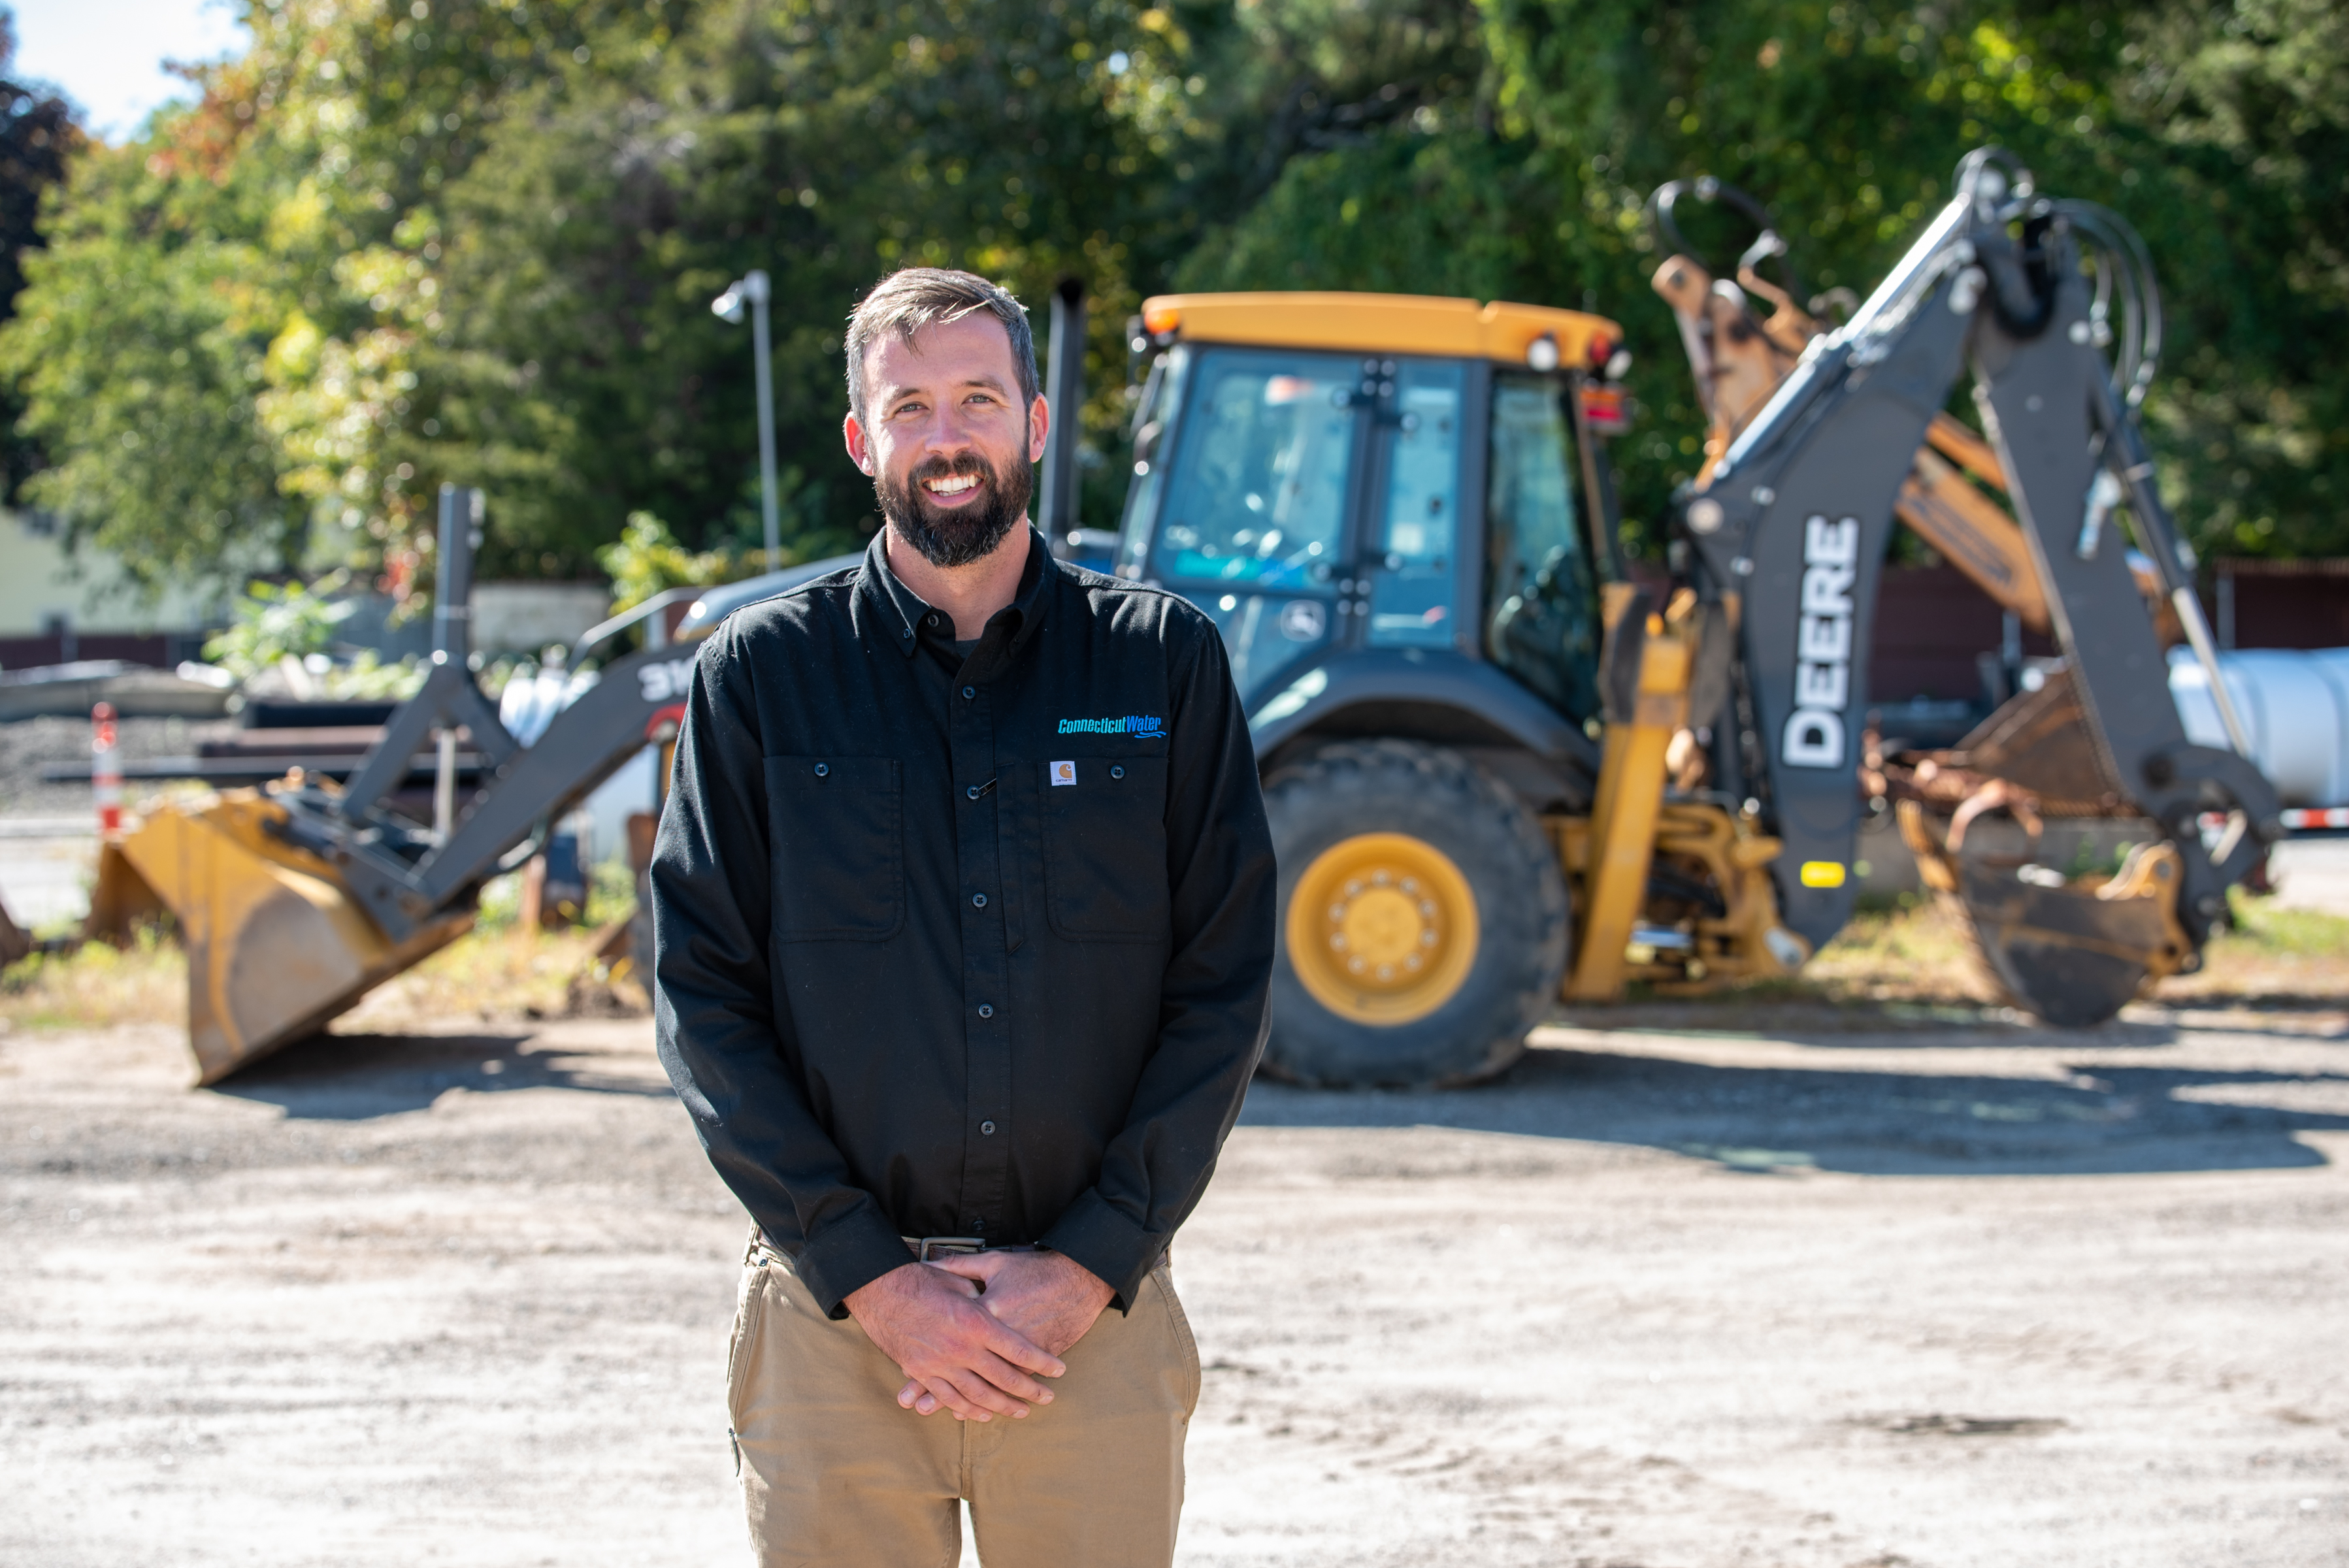 CT Water employee in front of a backhoe looking at the camera and smiling